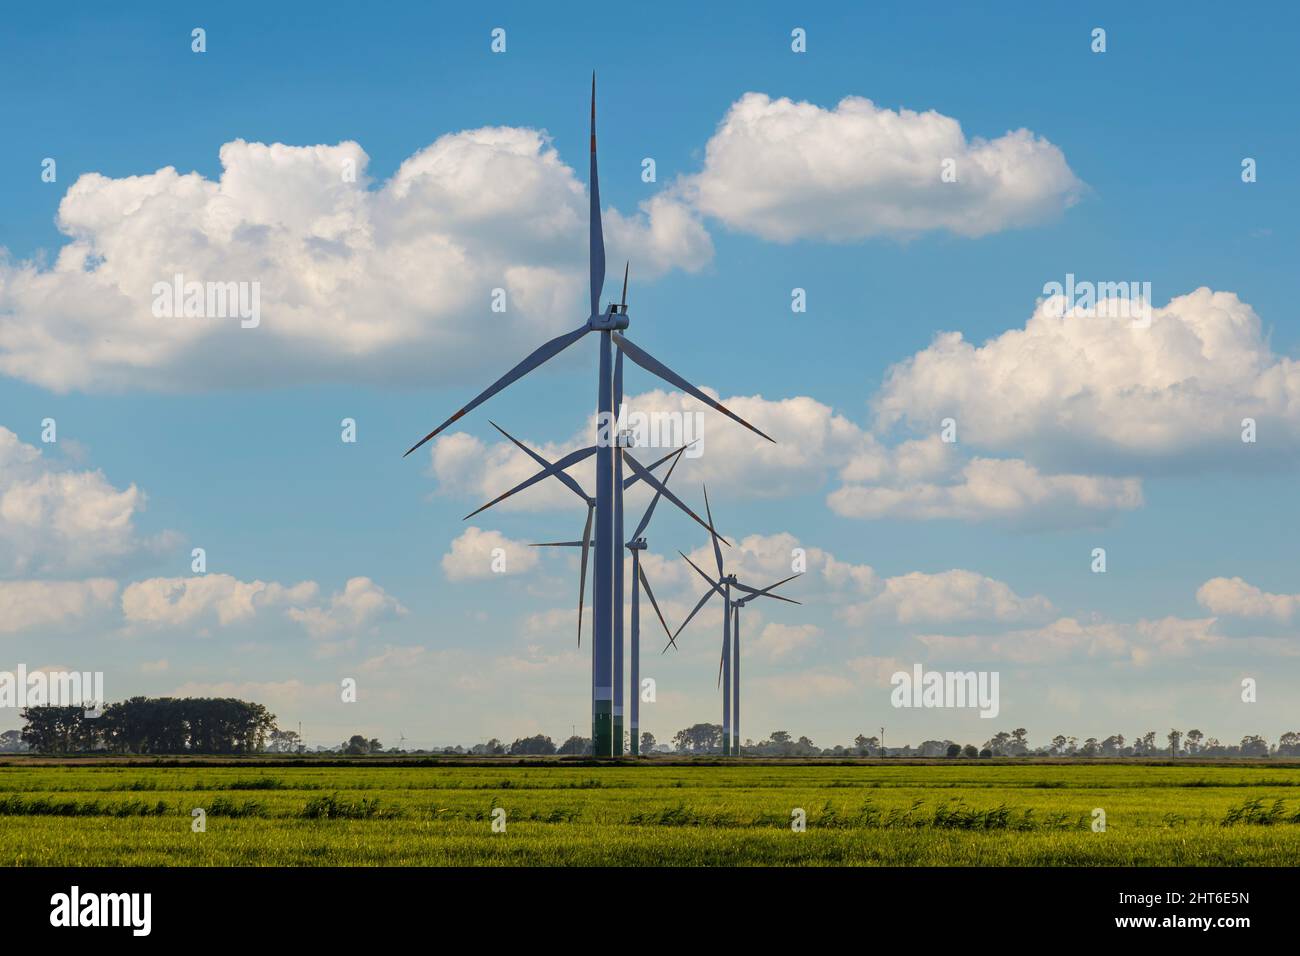 Windmill farm on green meadow, green energy production using wind power Stock Photo